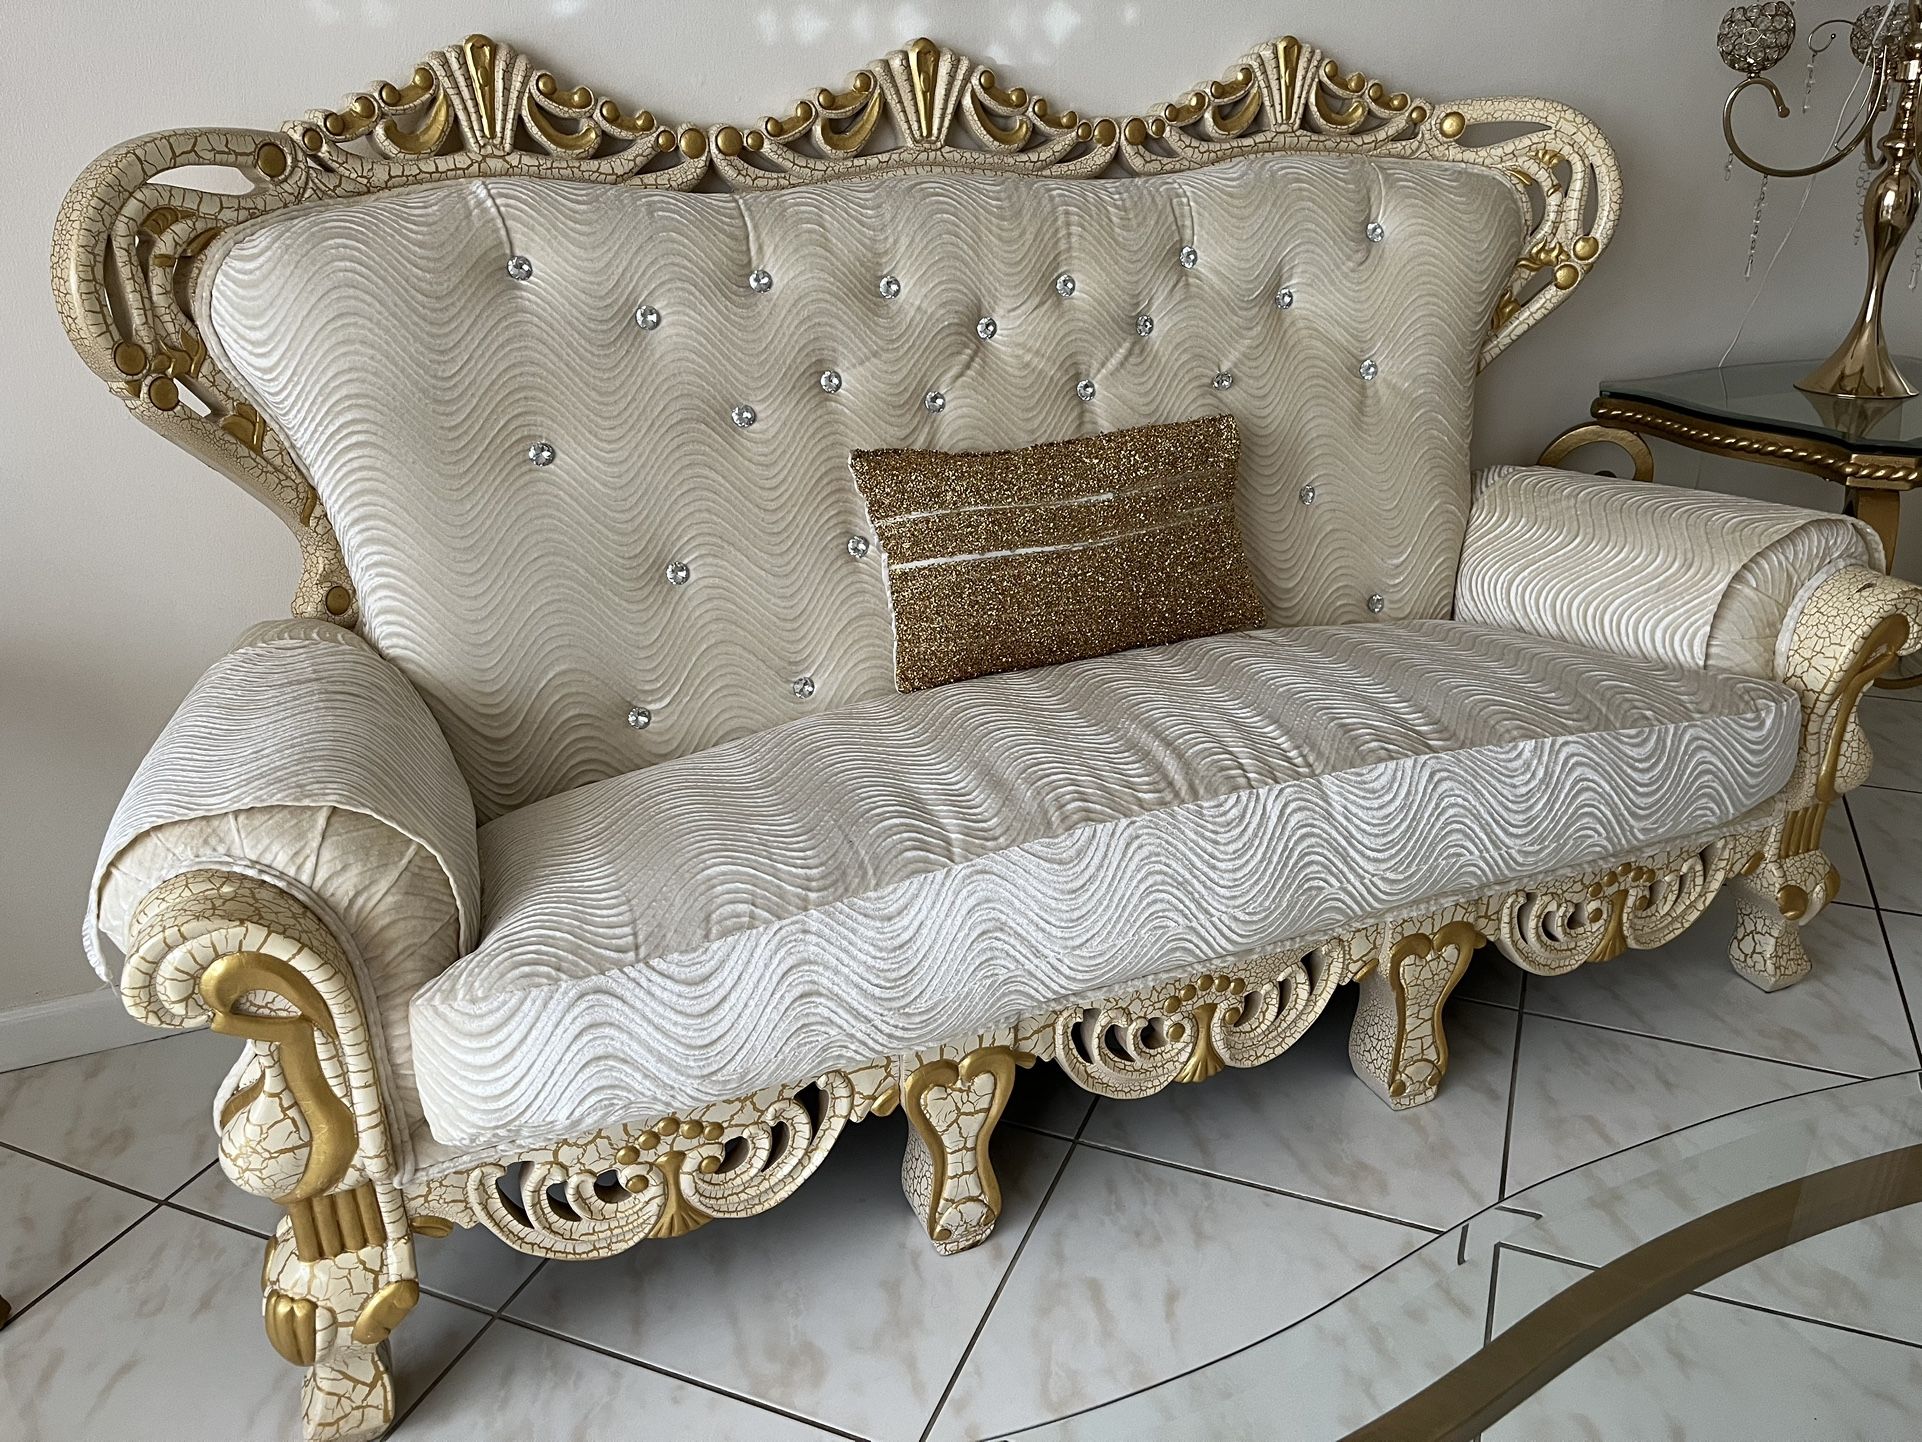 French credential sofa set